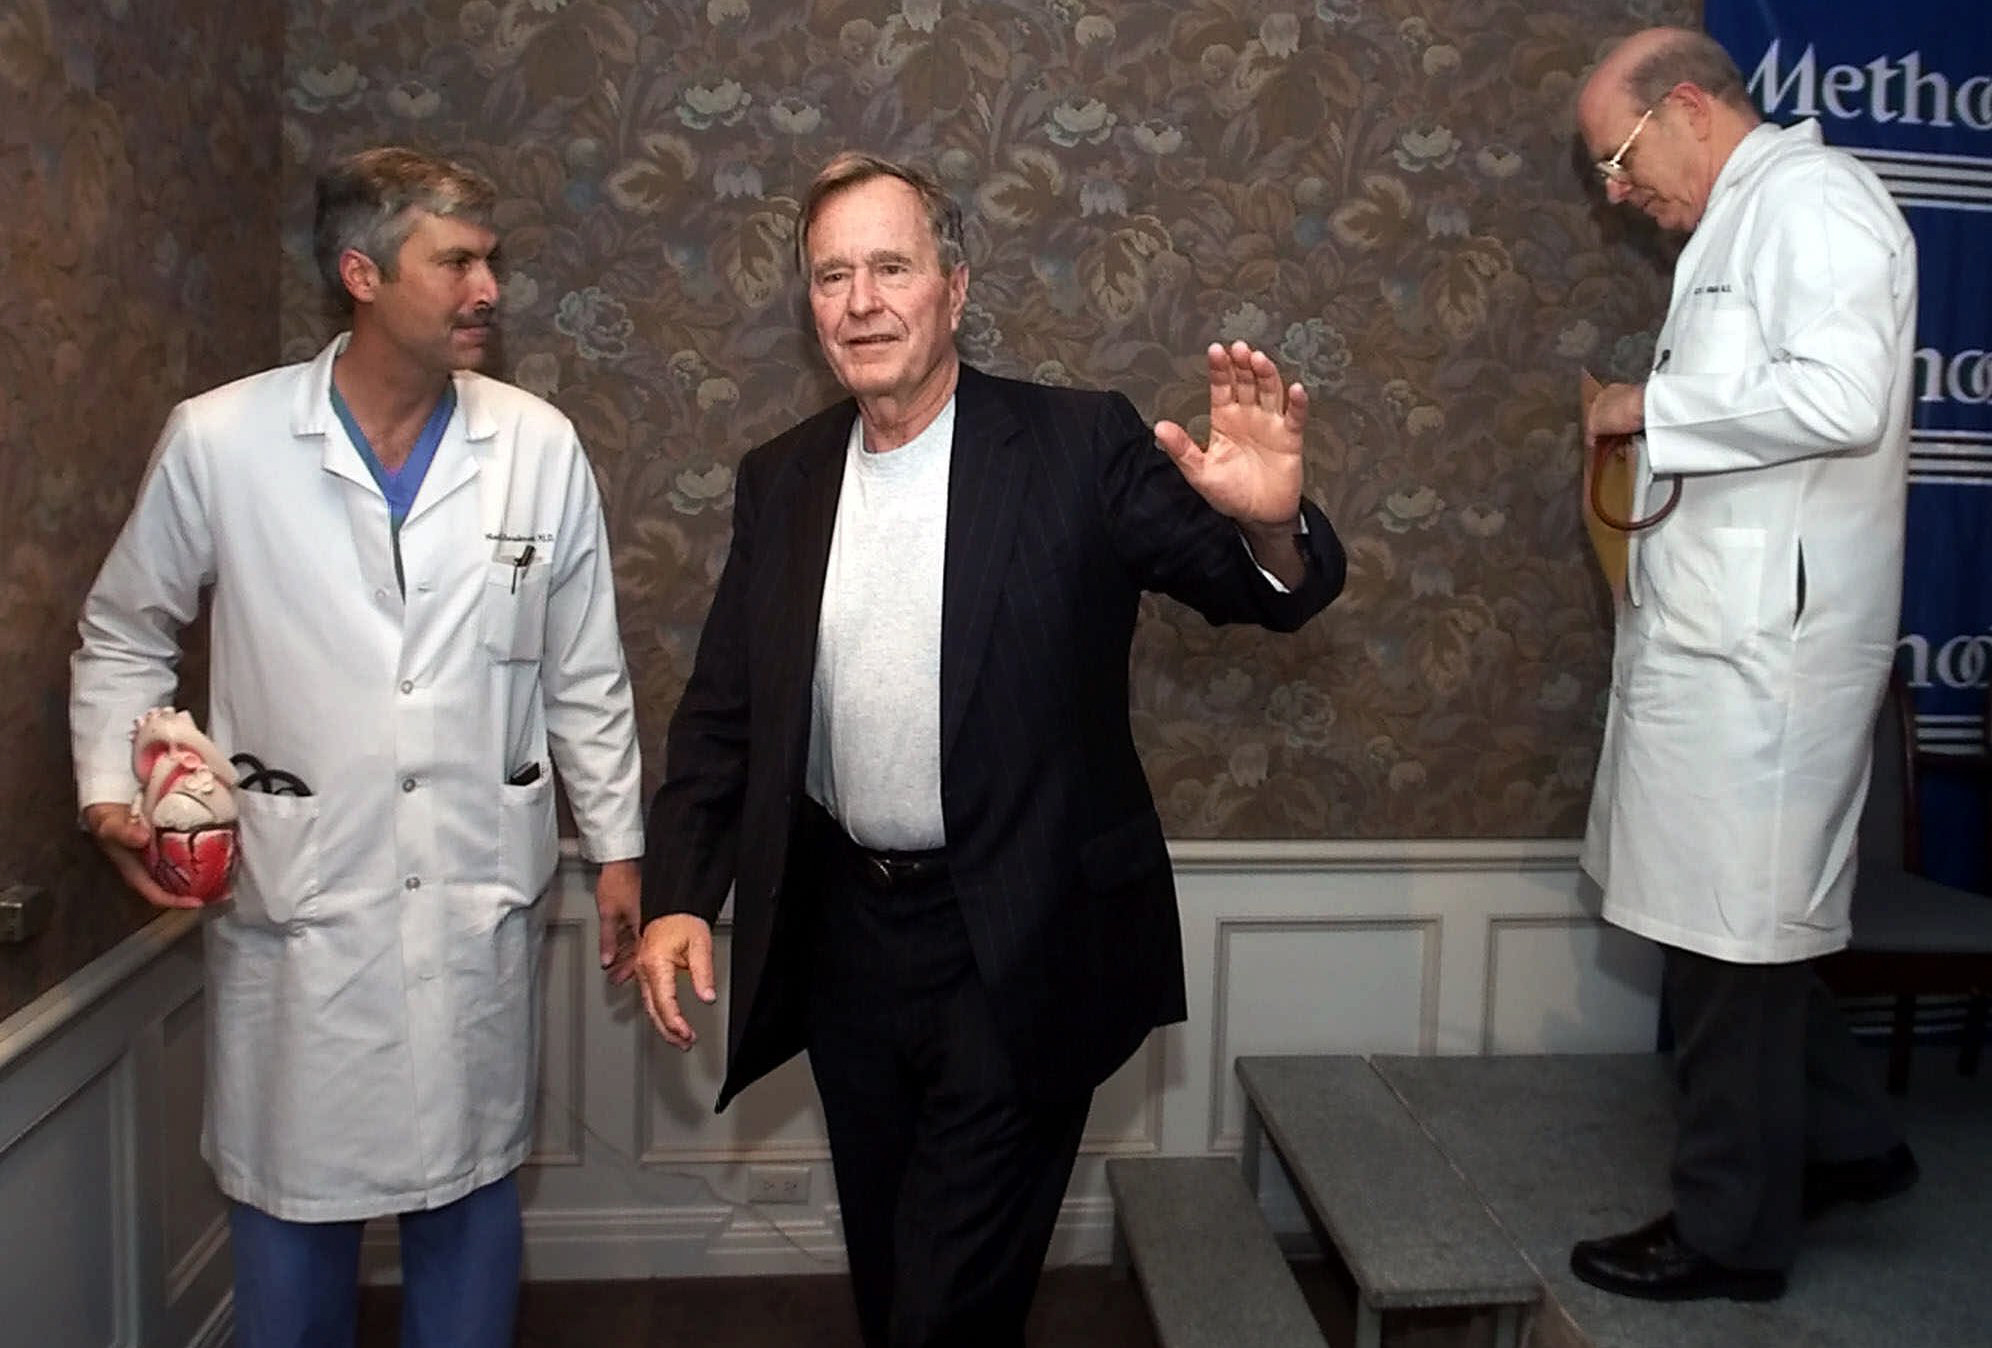 PHOTO: Former President George HW Bush, center, waves as he leaves with cardiologist Mark Hausknecht, left, and Bush's family doctor Ben Orman, right, after a news conference at Methodist Hospital, Feb. 25, 2000, in Houston.